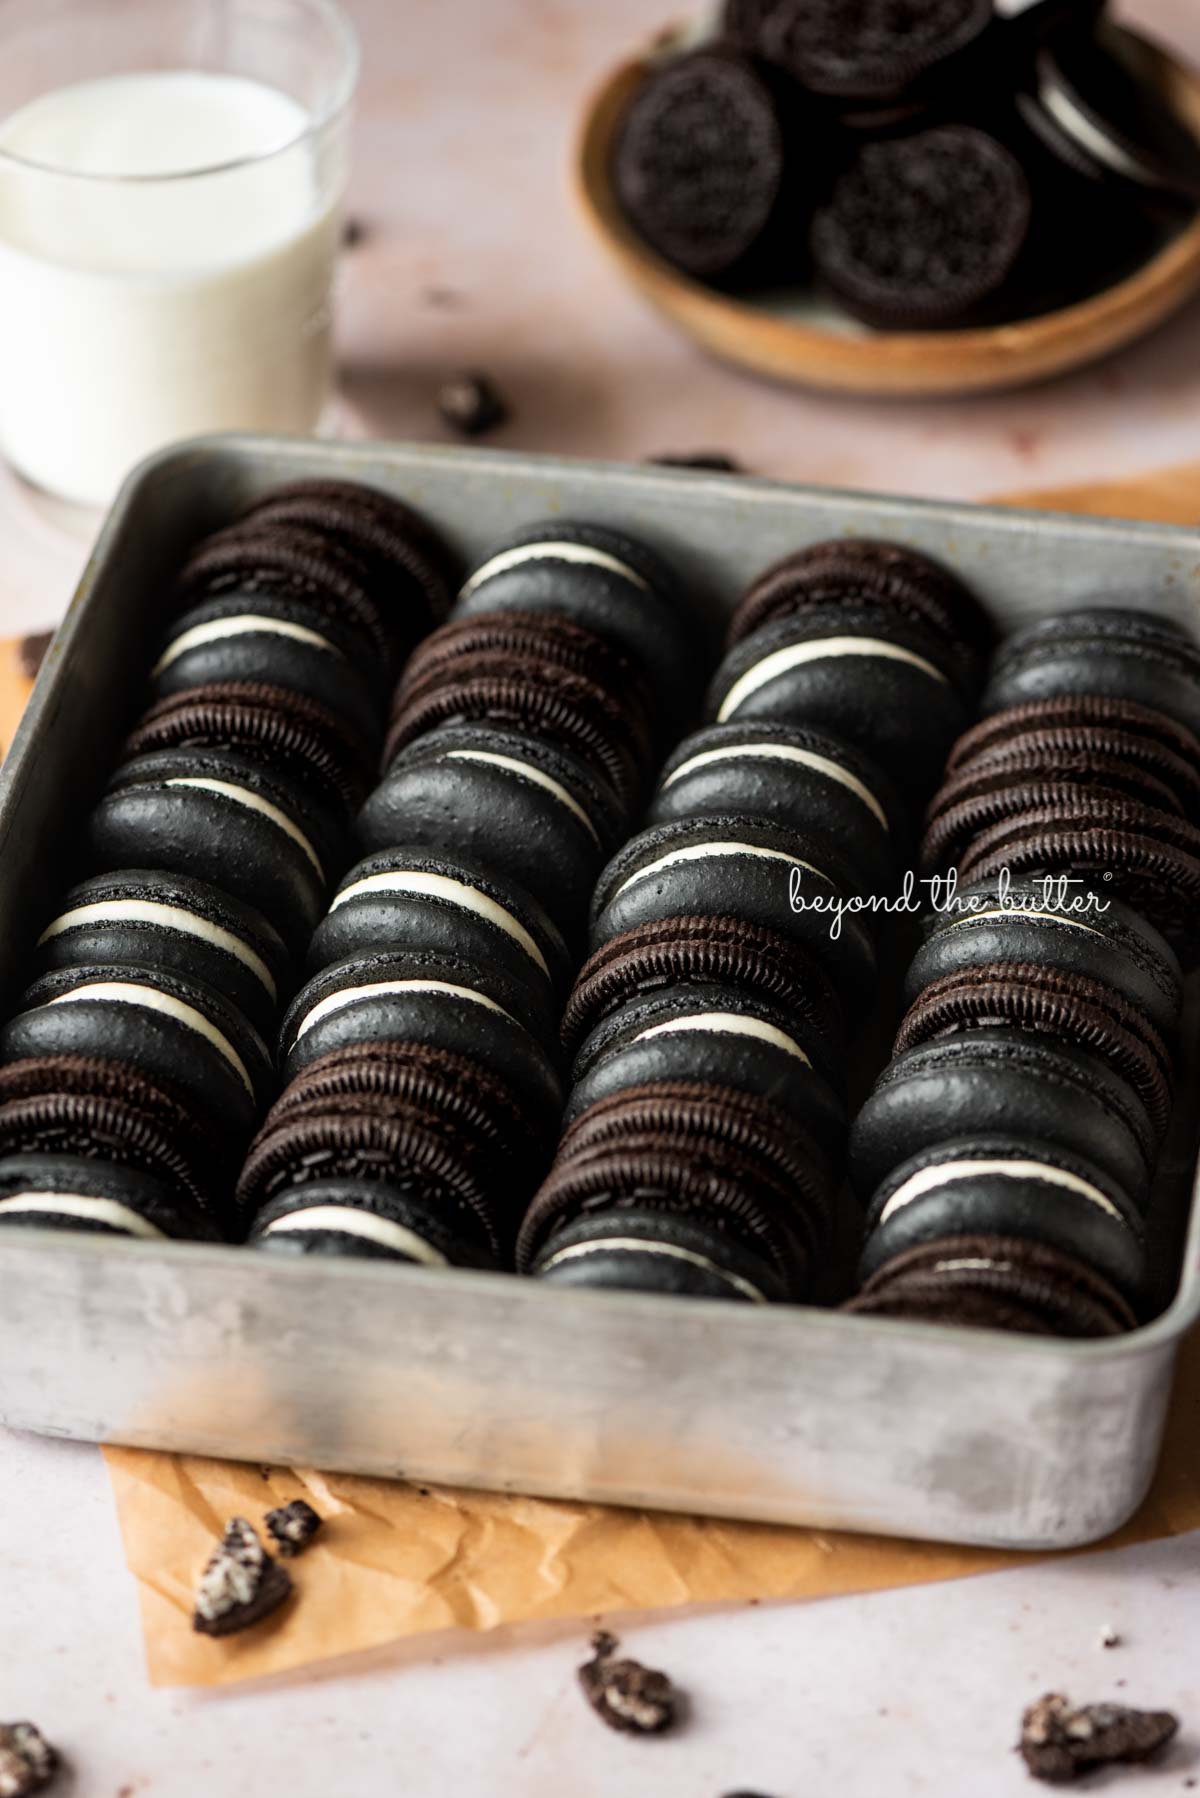 Oreo macarons and oreo cookies in a vintage baking tin on parchment paper with a glass of milk and bowl of oreo cookies in the background | © Beyond the Butter®